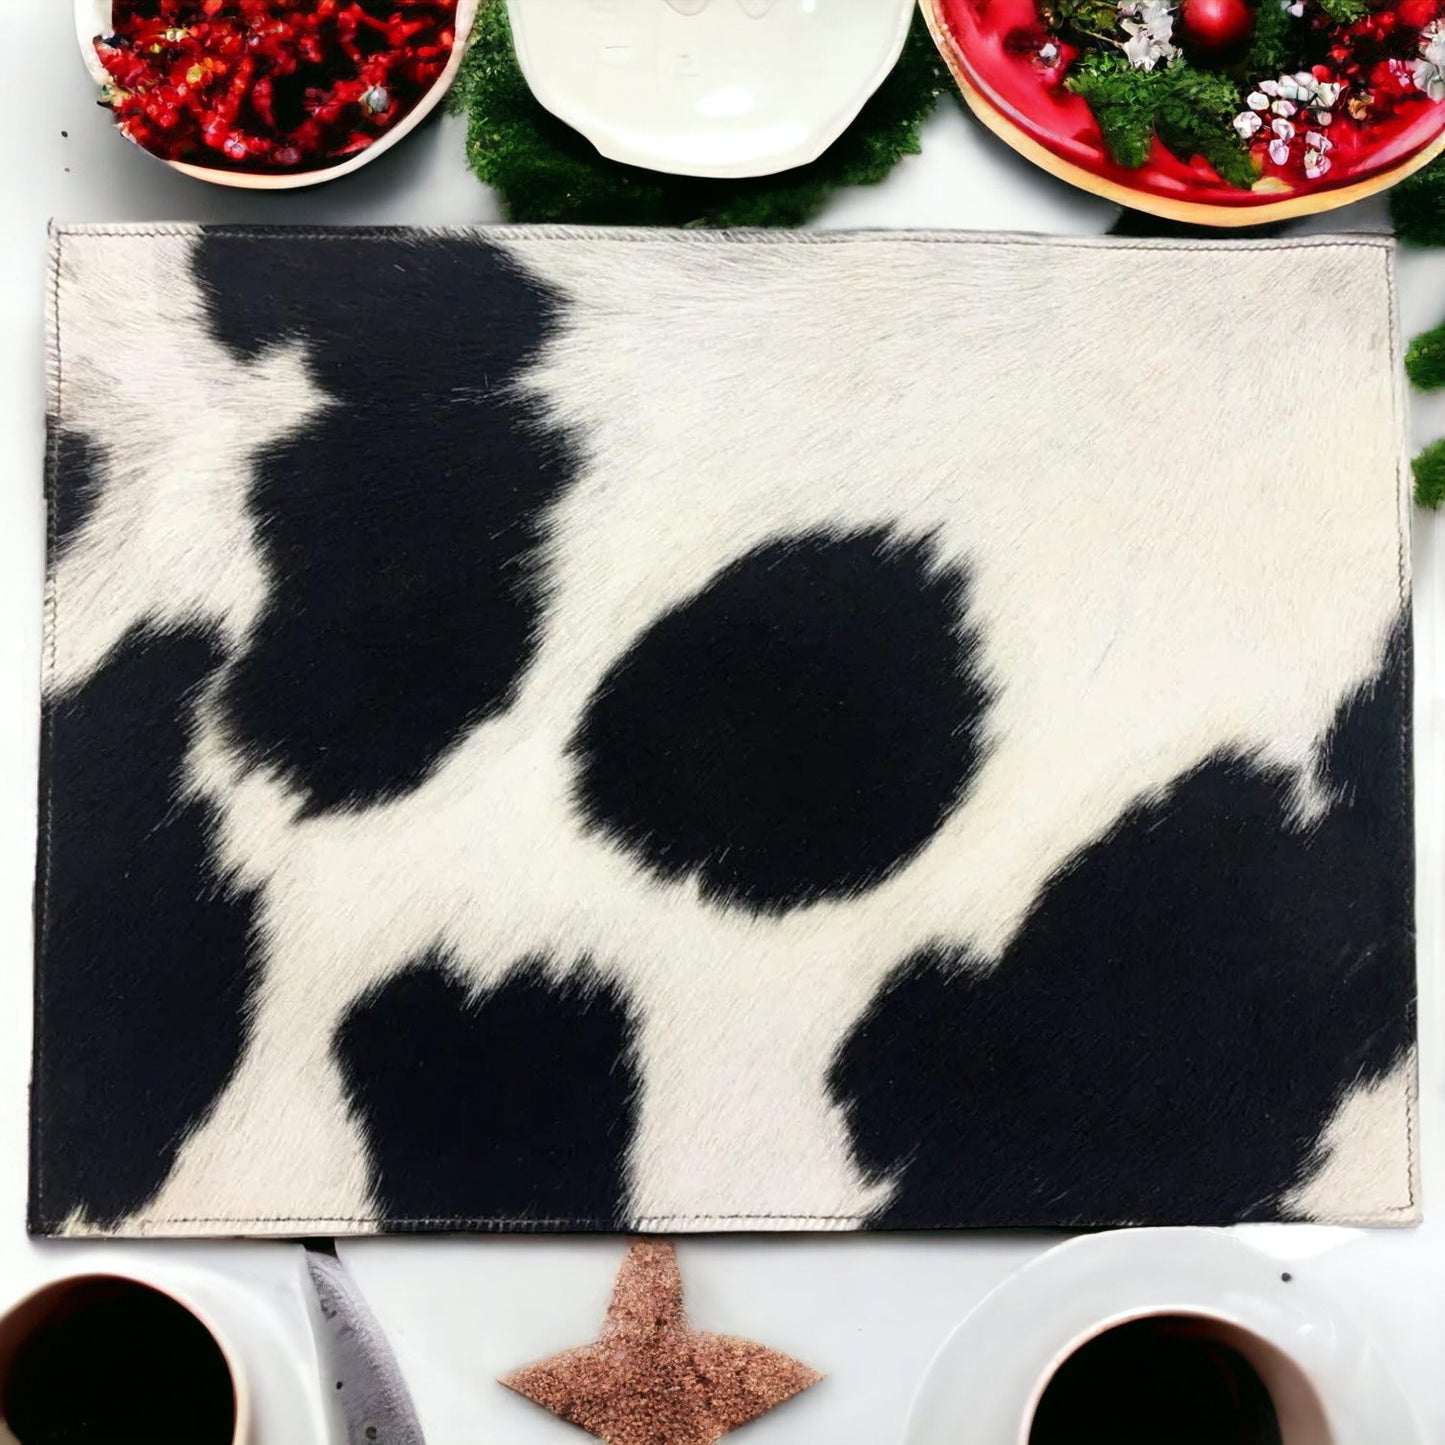 Rodeo cowhide placemats - Rodeo Cowhide RugsBlack and White